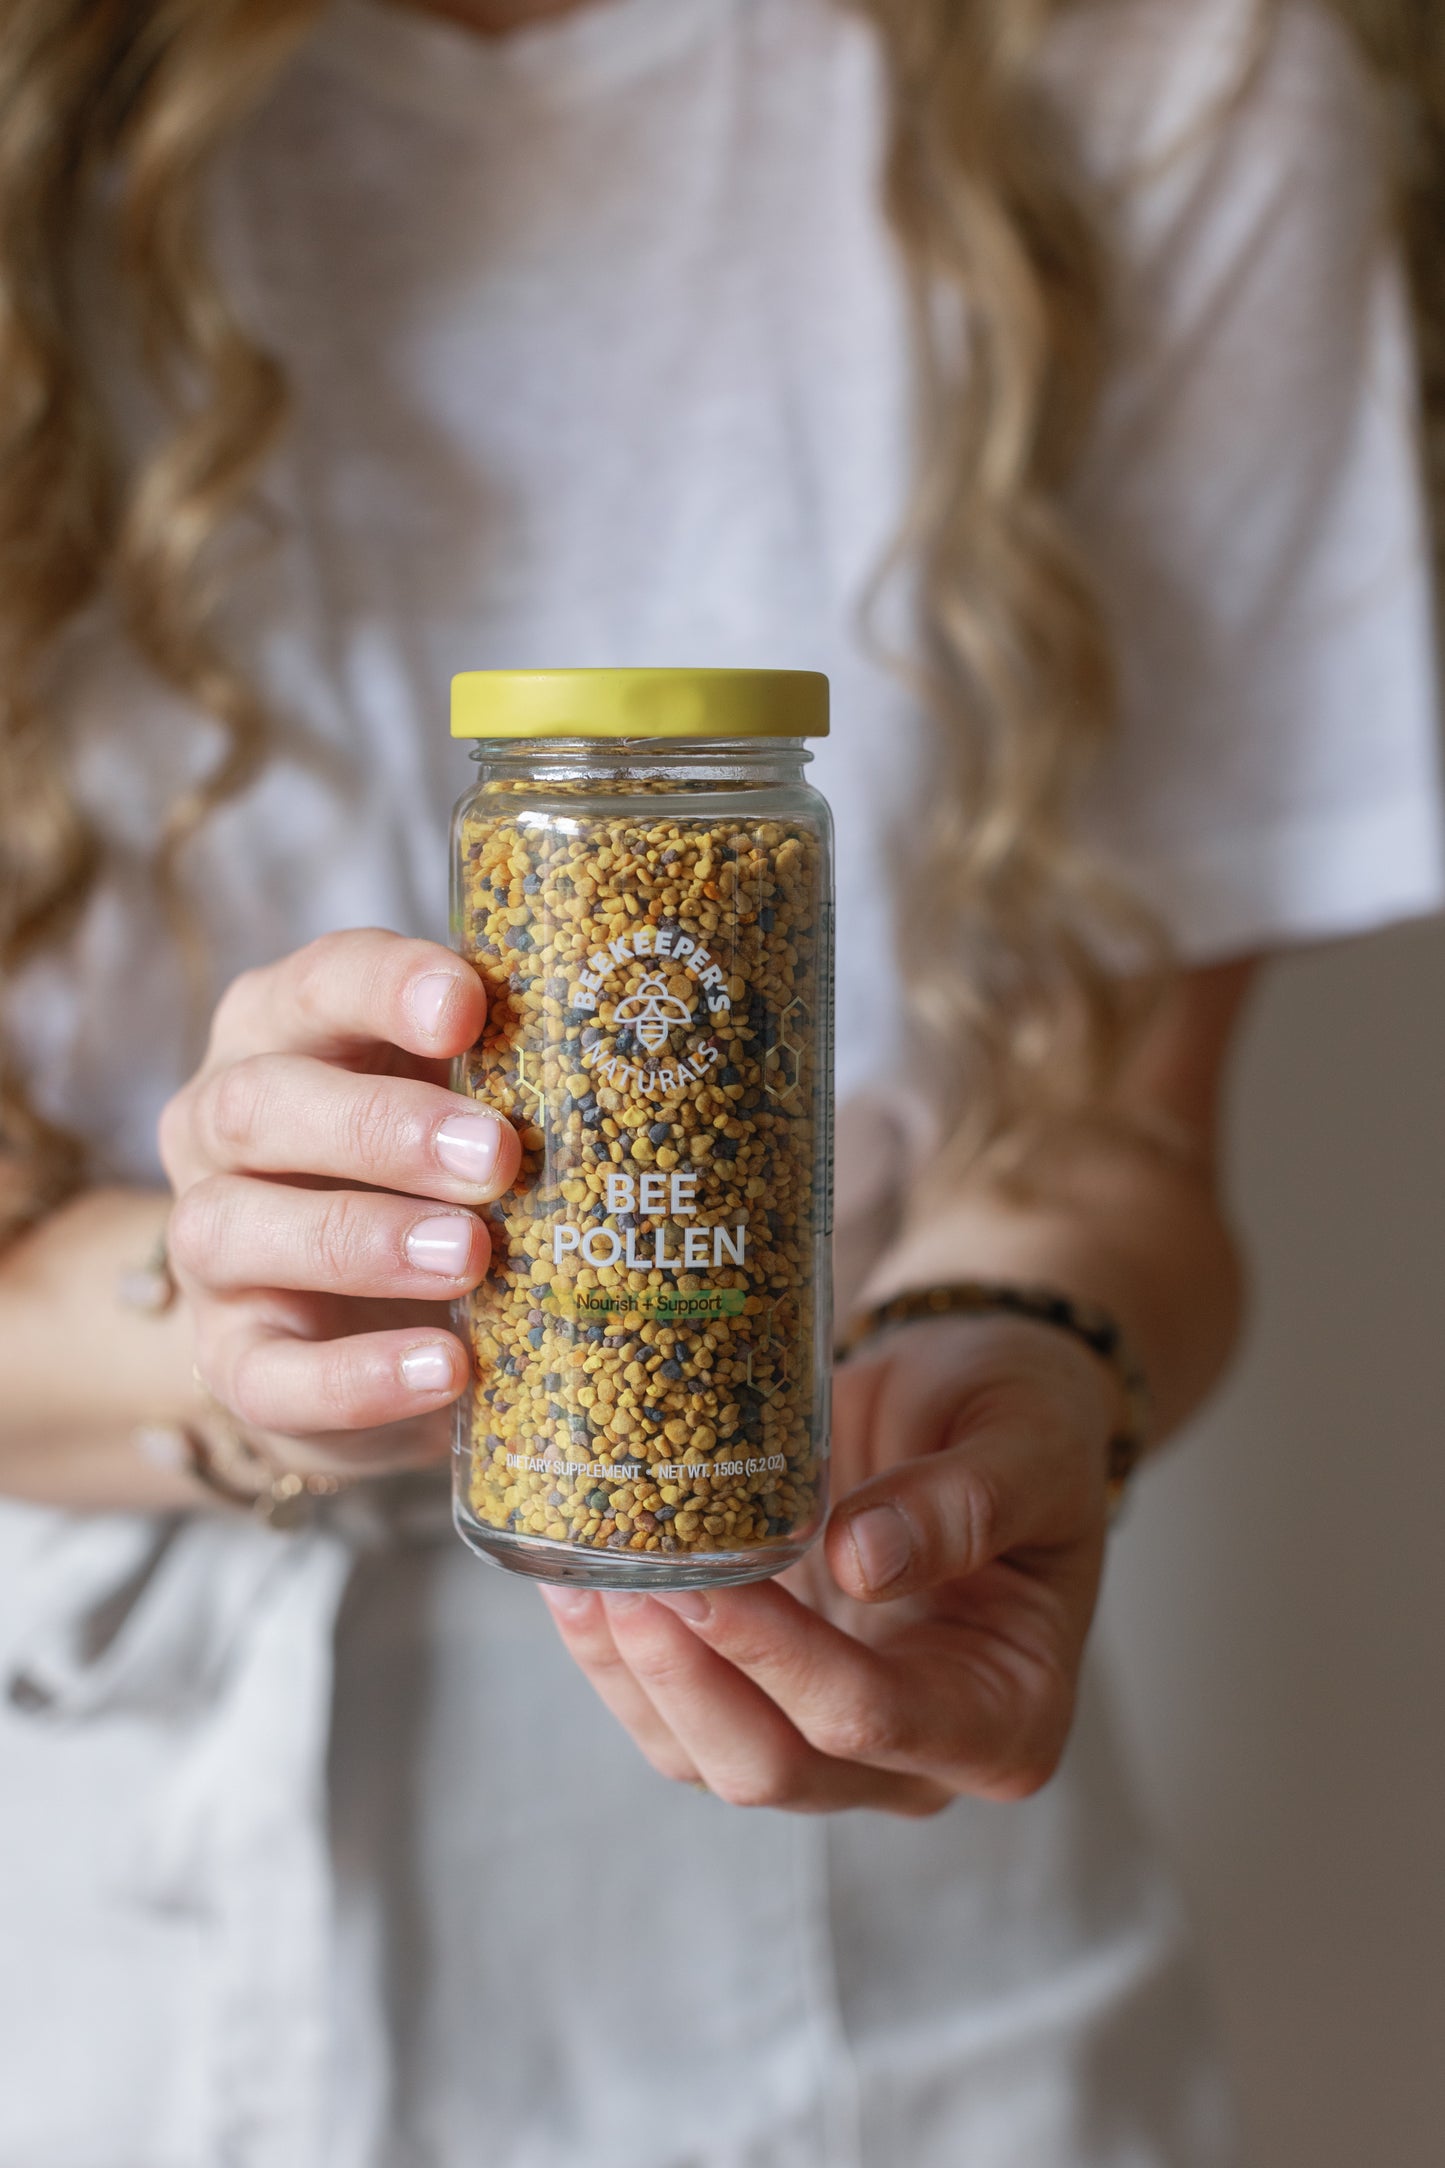 Picture of Caroline holding the packaging for the Bee Pollen product